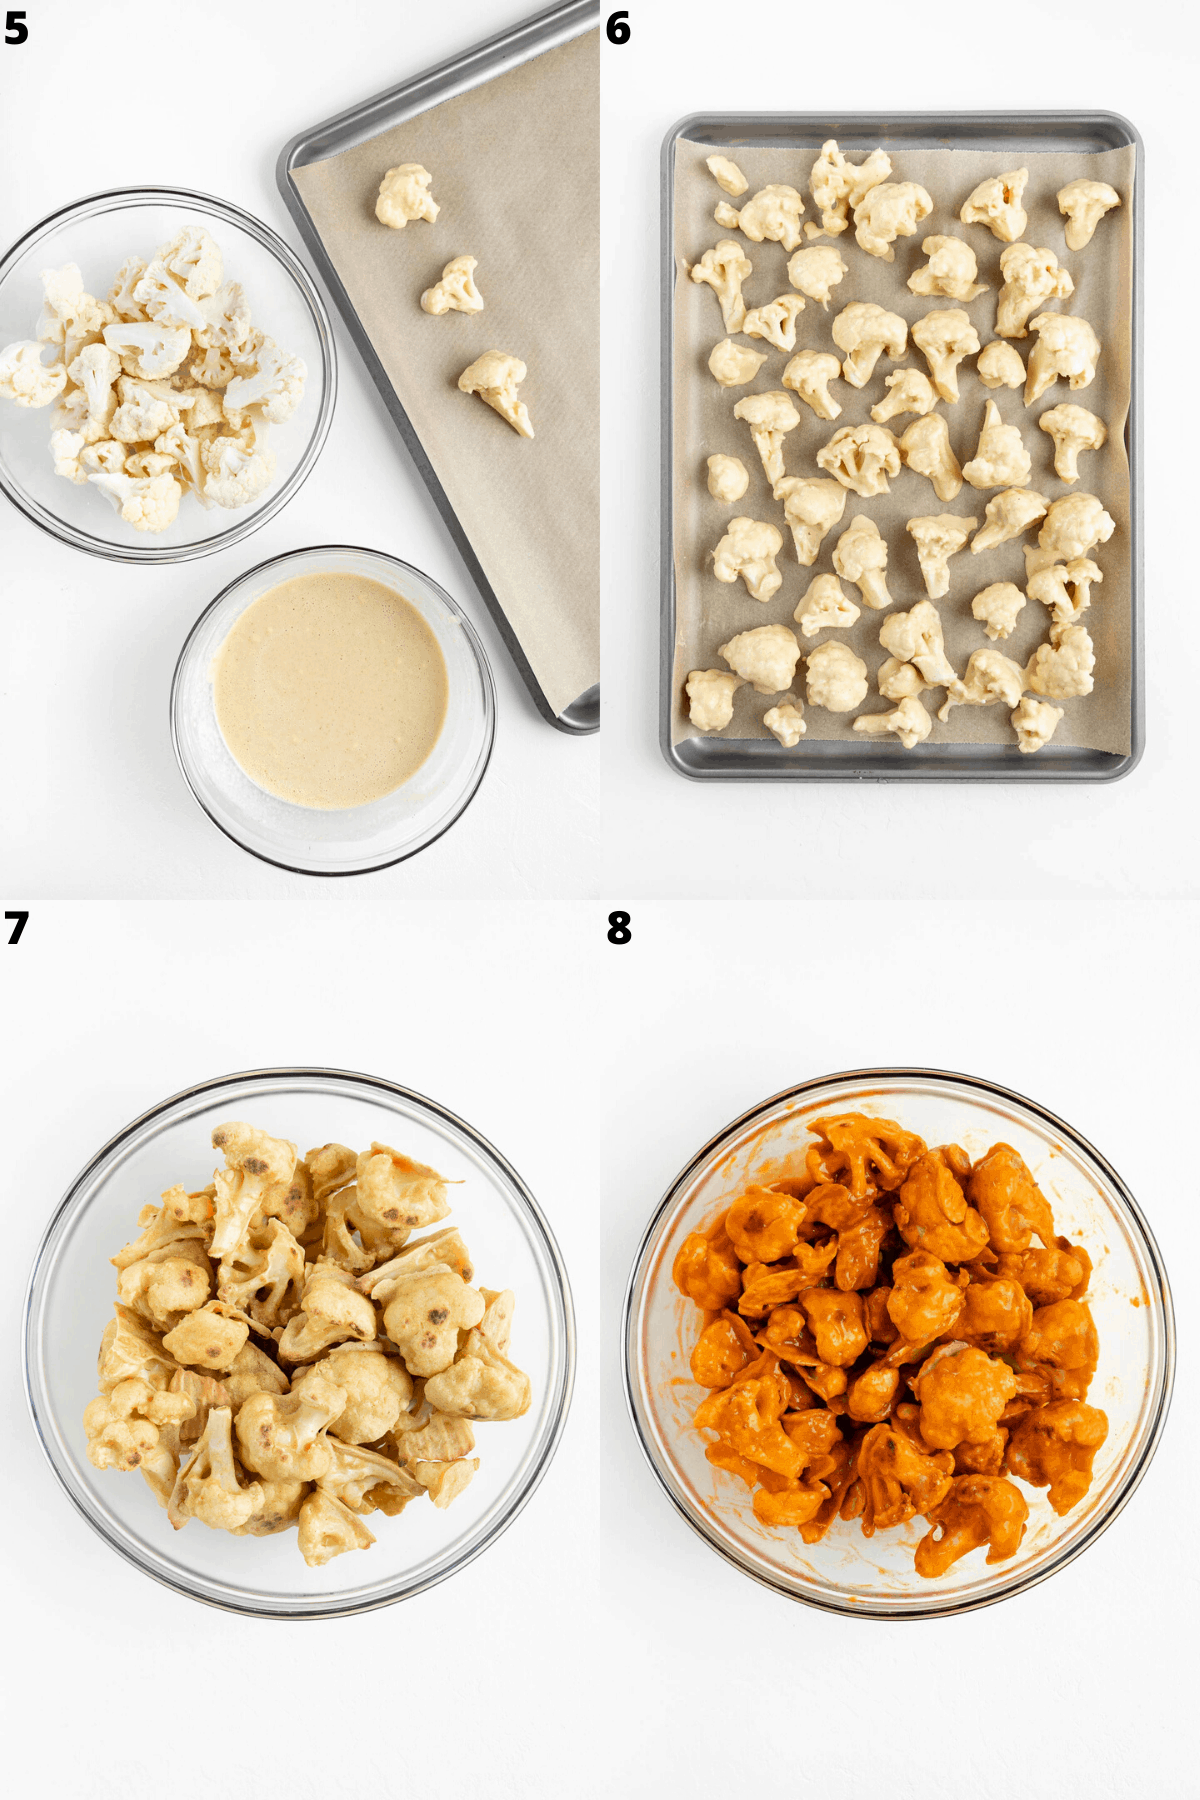 preparing cauliflower wings by dipping them into batter, placing them on a baking sheet, and pouring hot sauce over them